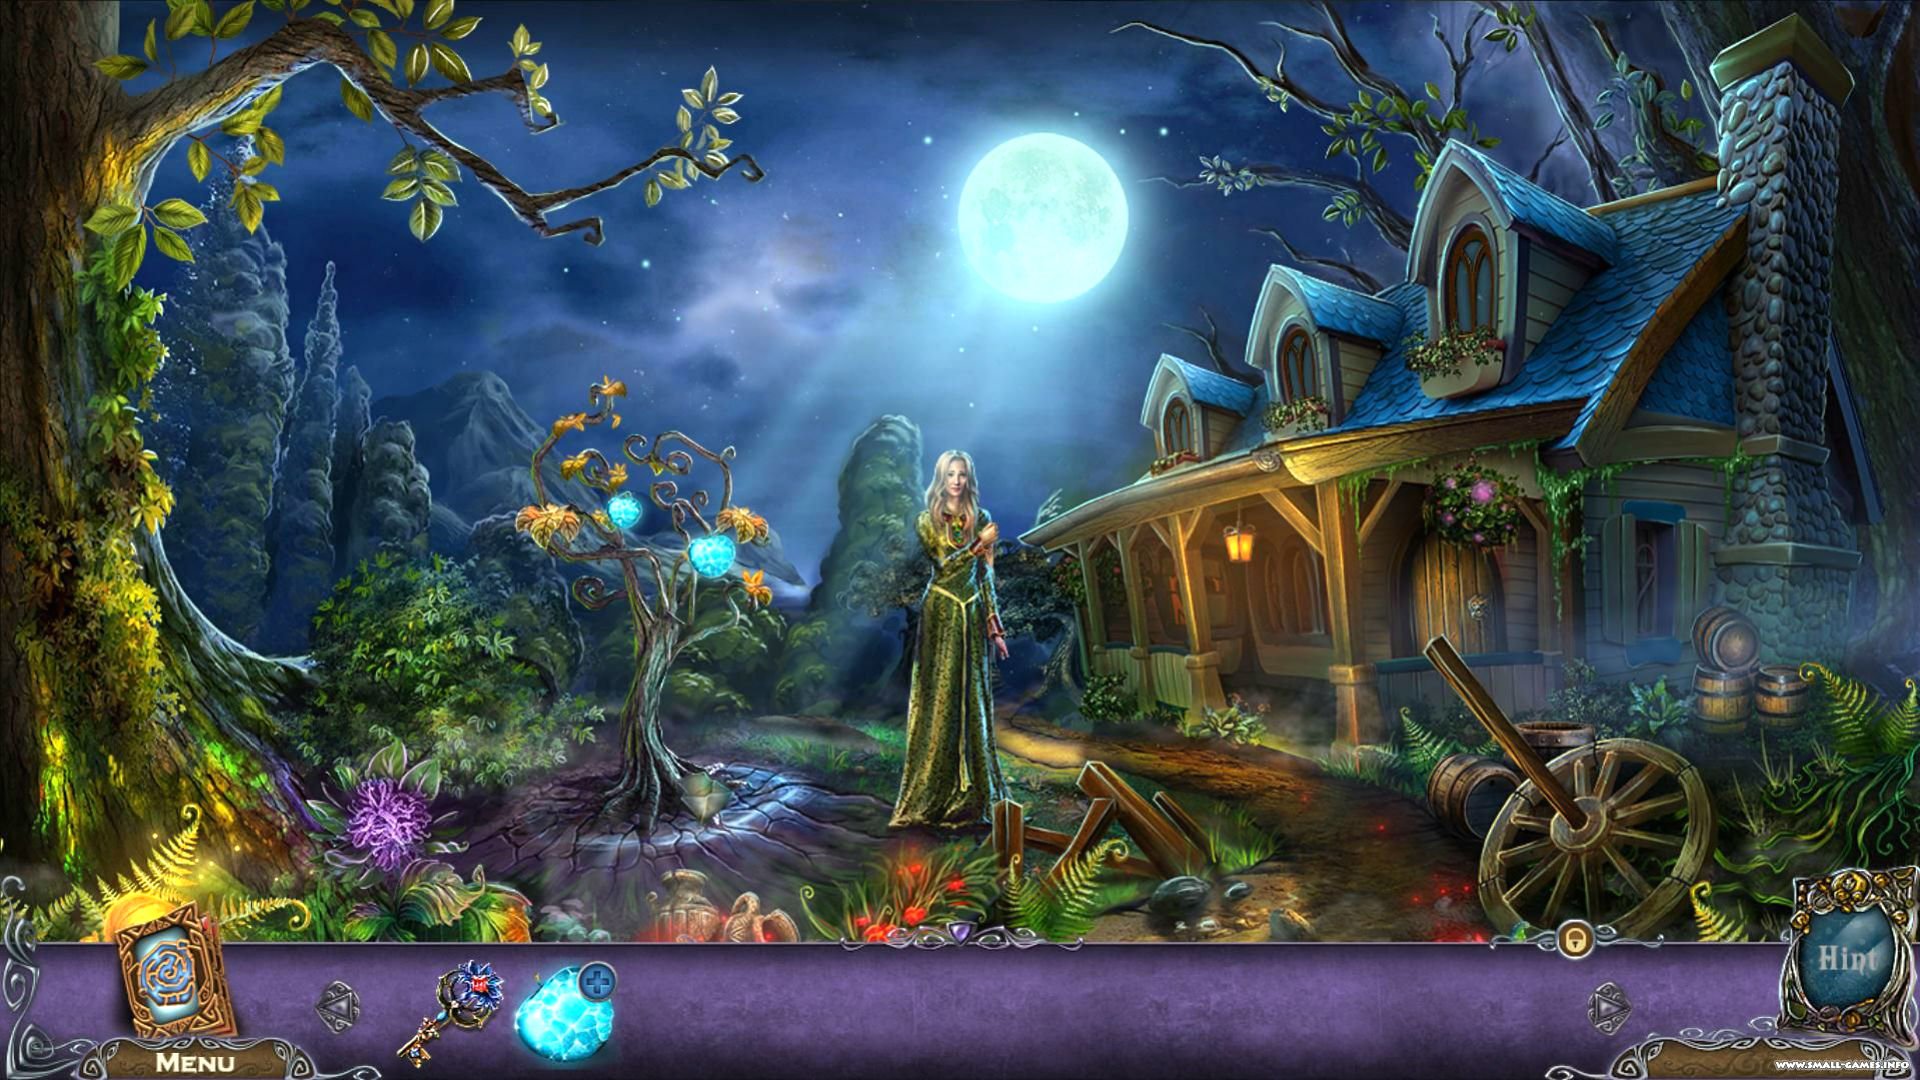 ancient, Tales, Root, Evil, Adventure, Fantasy, Puzzle, Hiddenobject, Family, Strategy, 1rootevil, Artwork, Art Wallpaper